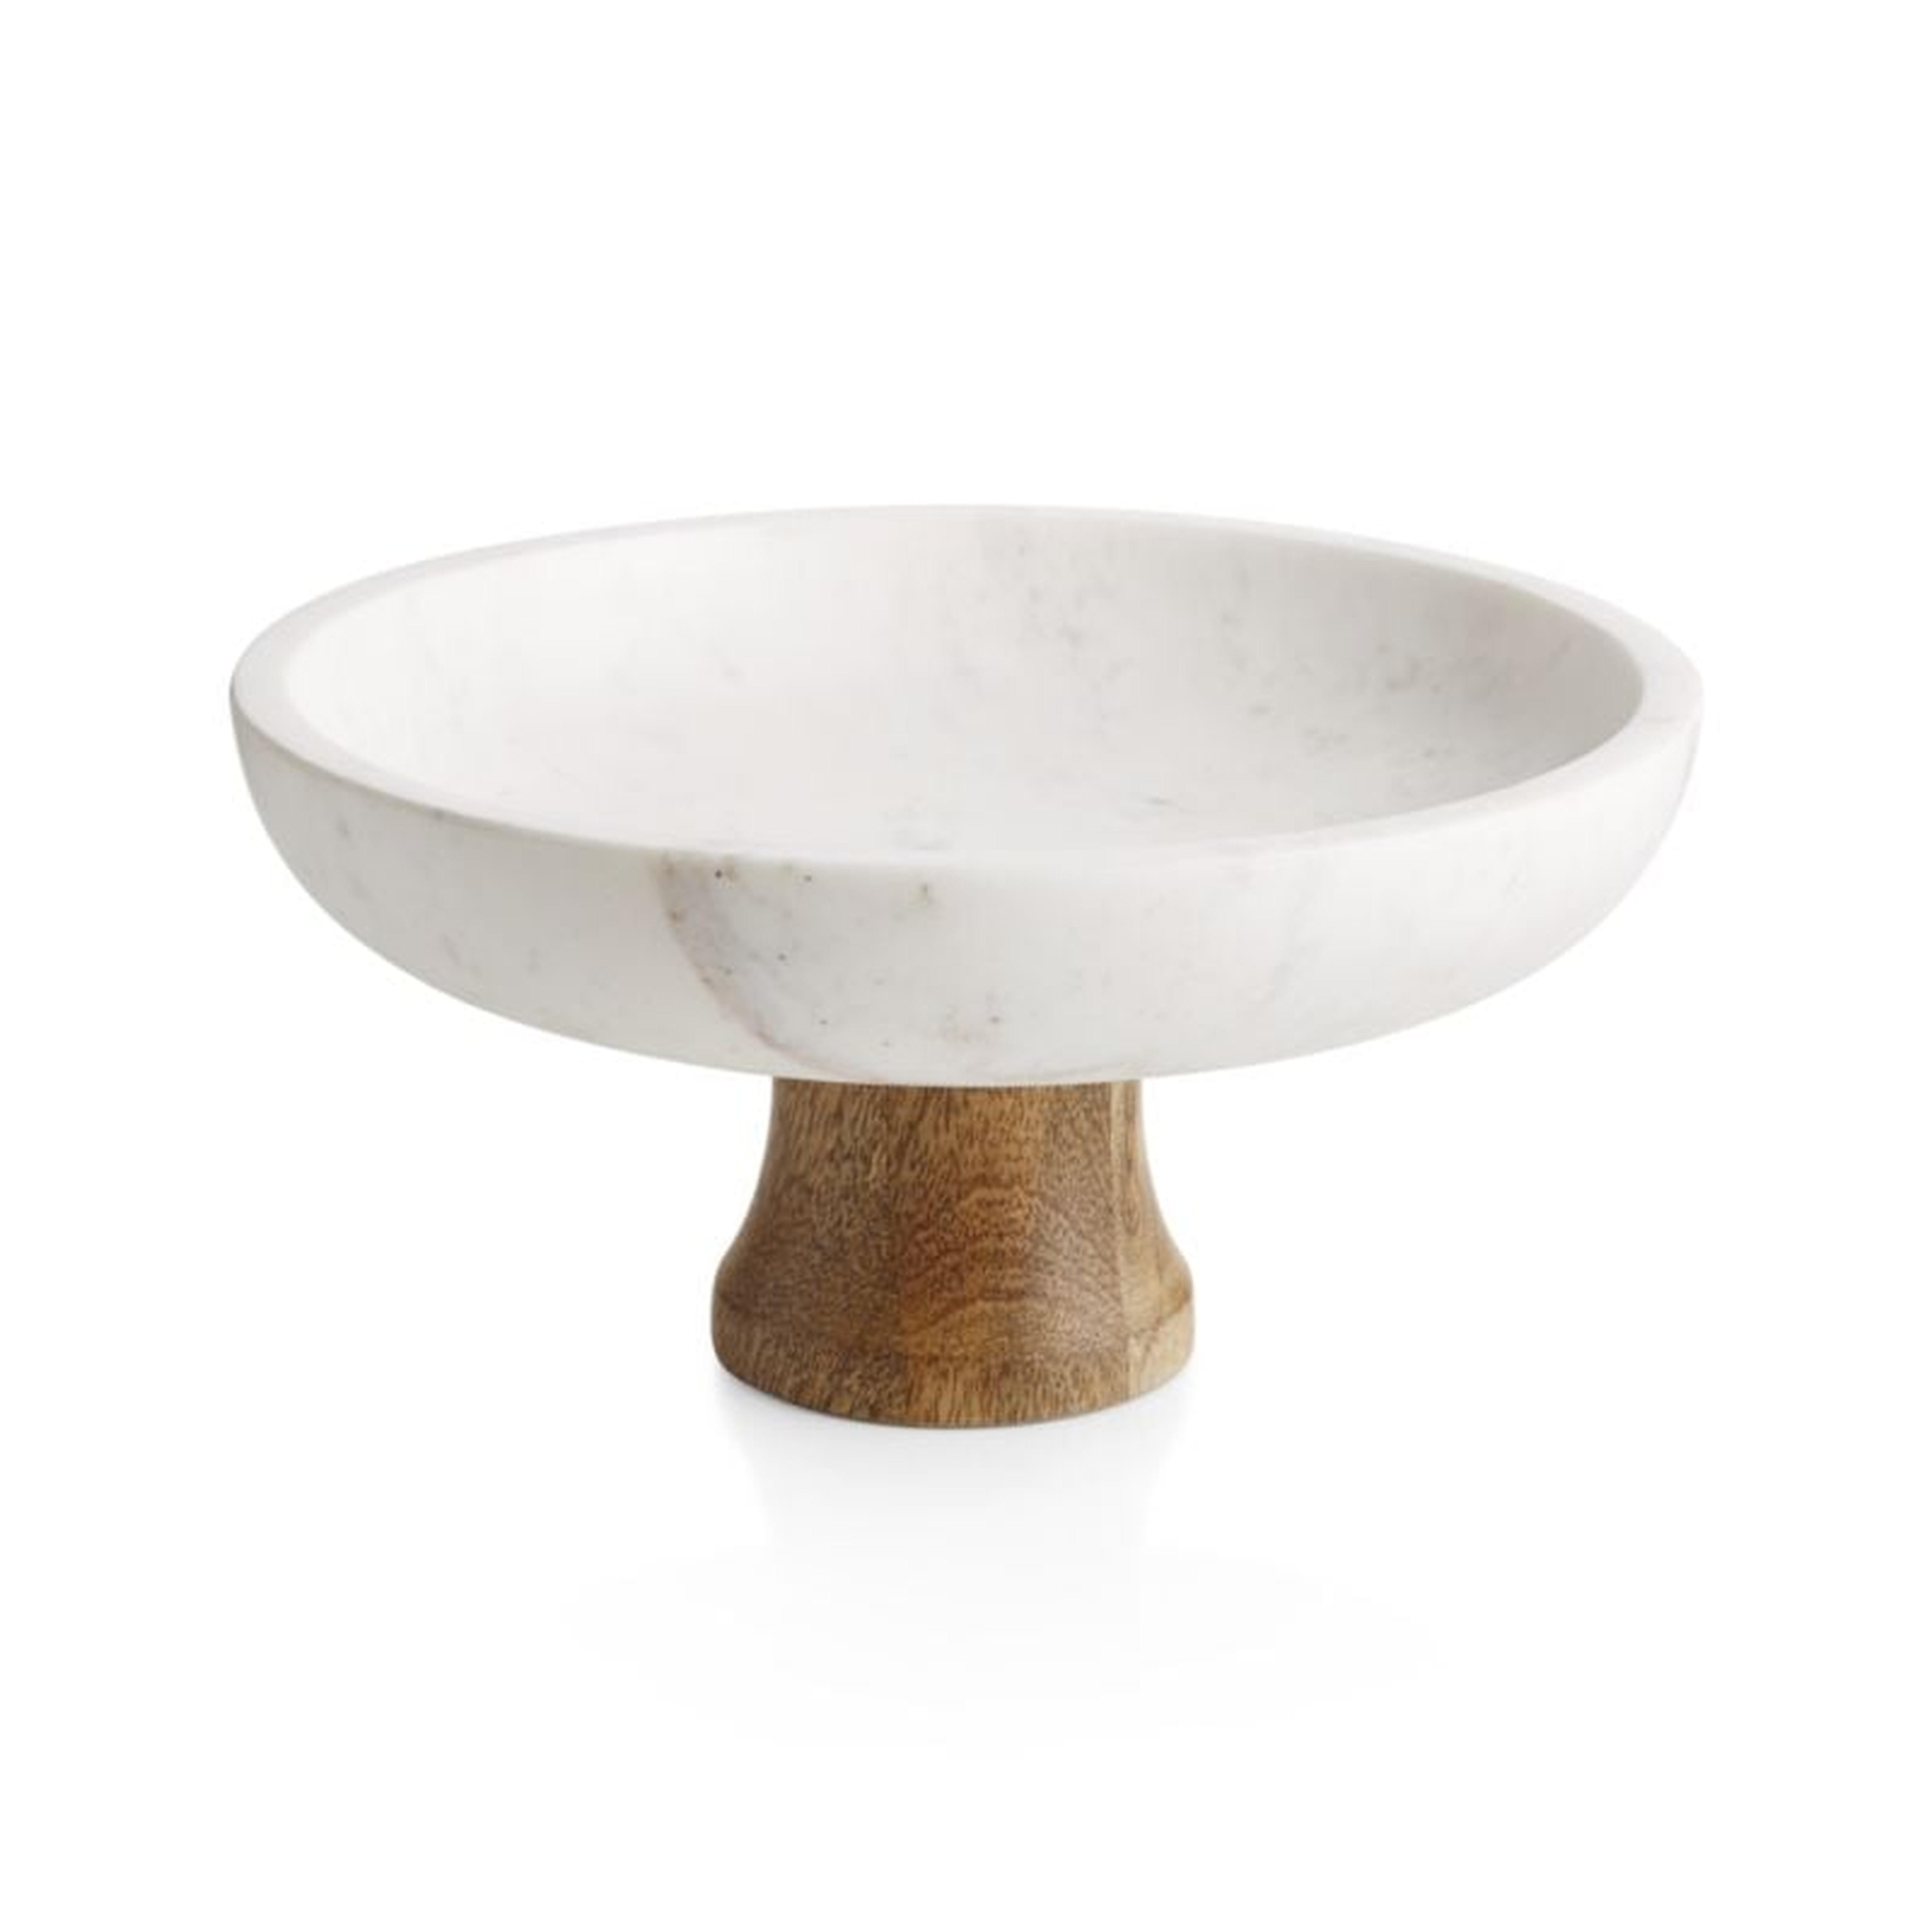 Wood & Marble Footed Fruit Bowl - Crate and Barrel